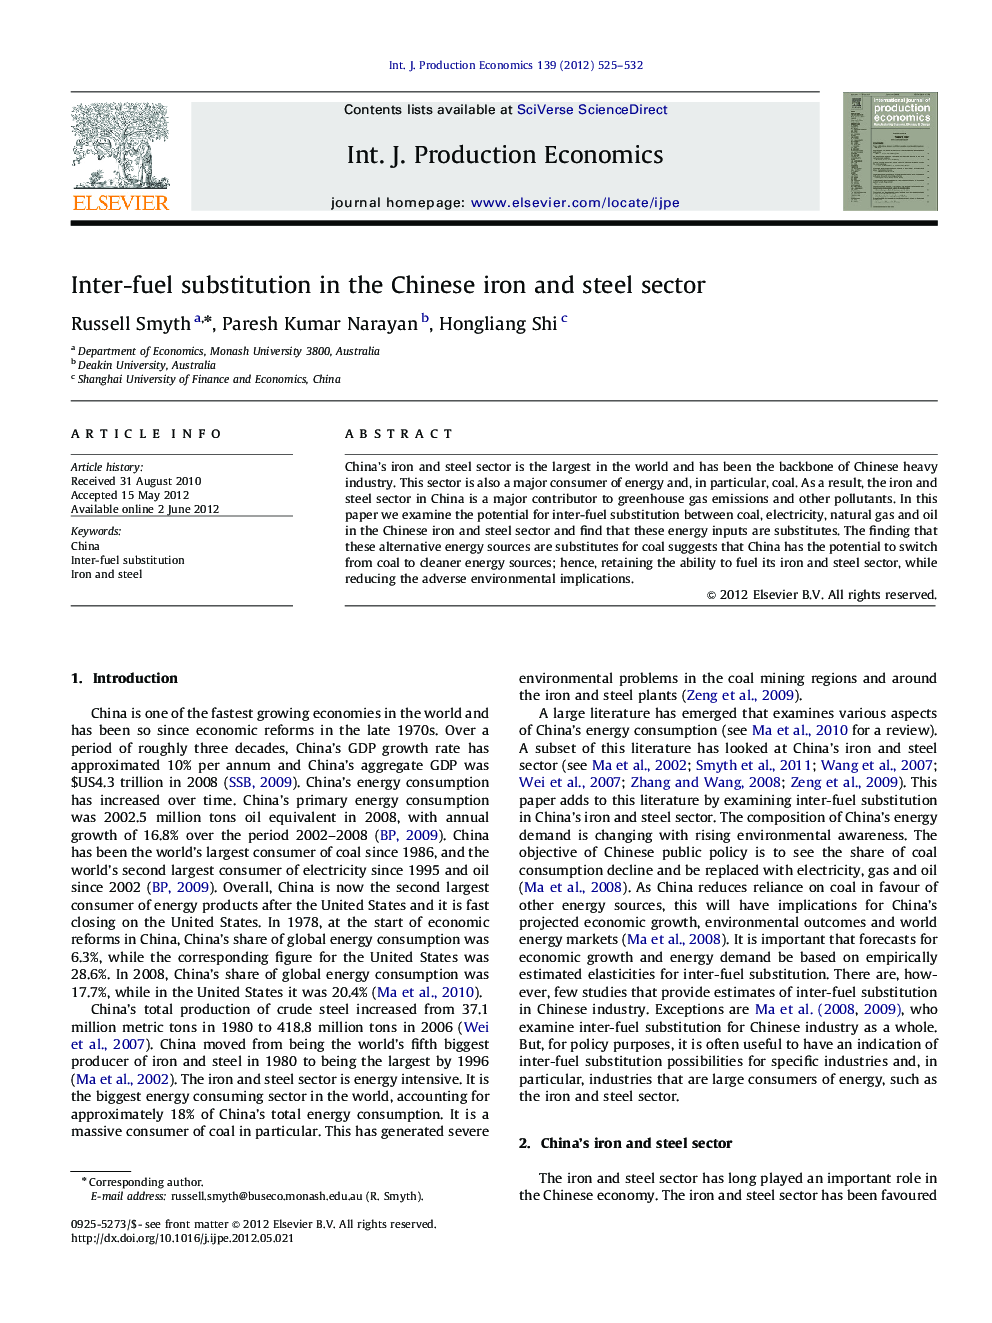 Inter-fuel substitution in the Chinese iron and steel sector